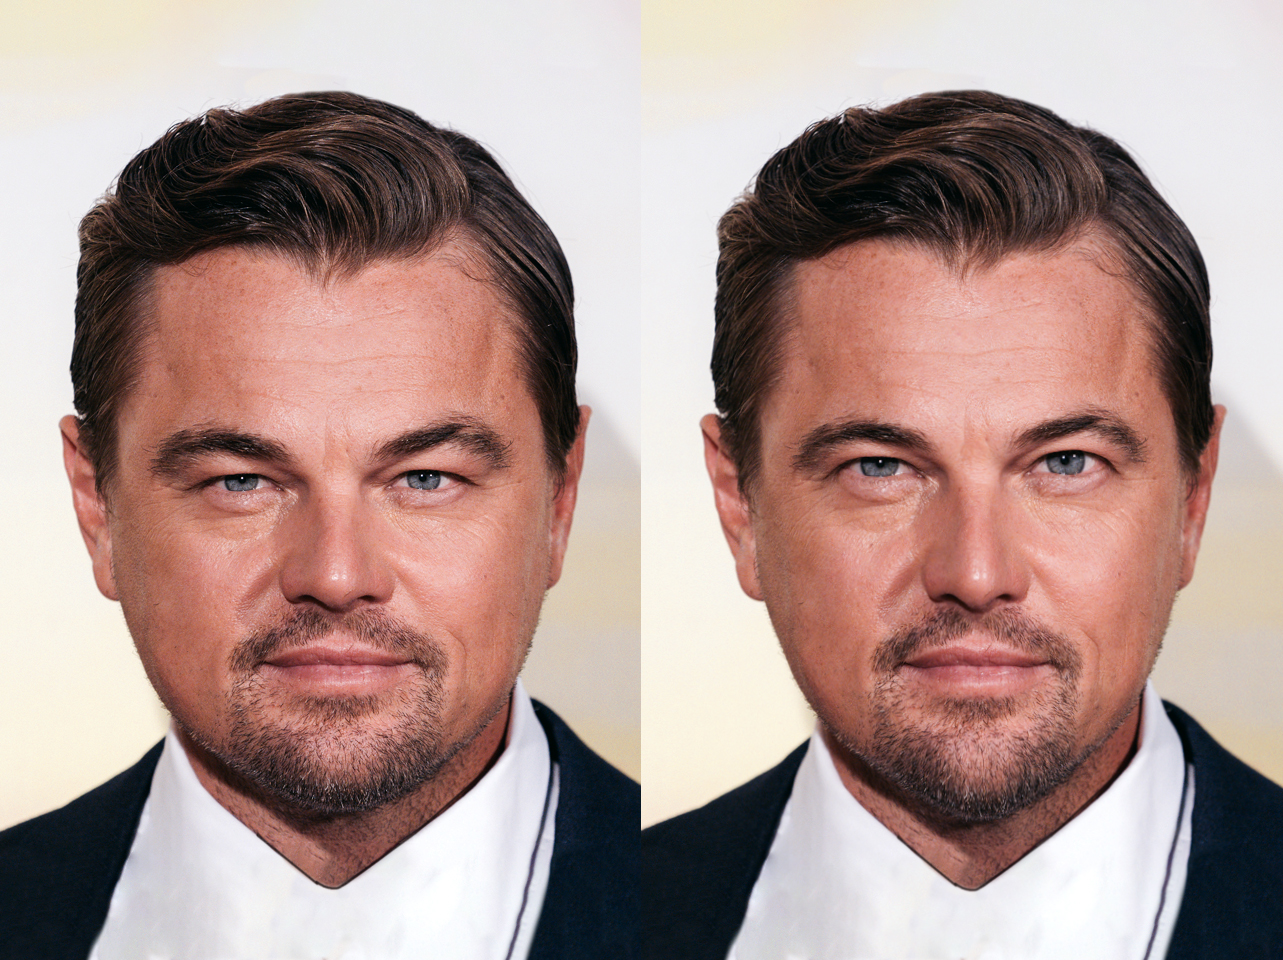 The real Leonardo DiCaprio vs Ideal self | Source: Getty Images